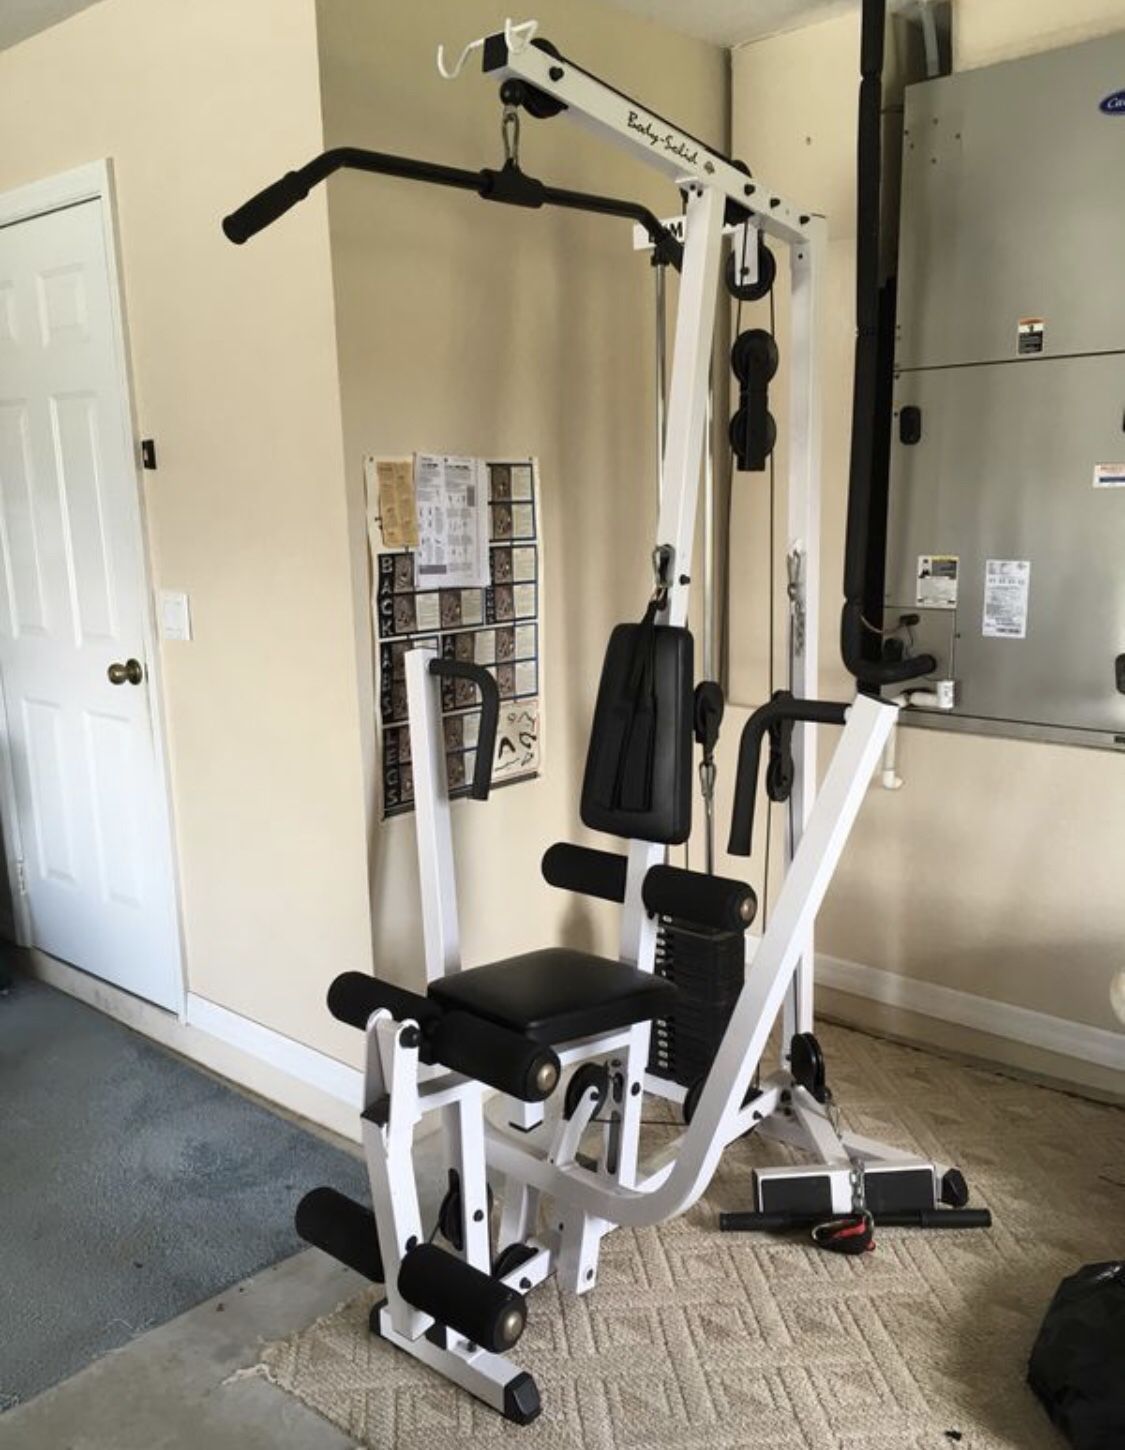 Body Solid home multi gym excellent condition with attachments Sells for $1225 plus taxes includes LARGE RUBBER MAT and tricep rope, rower, lat at